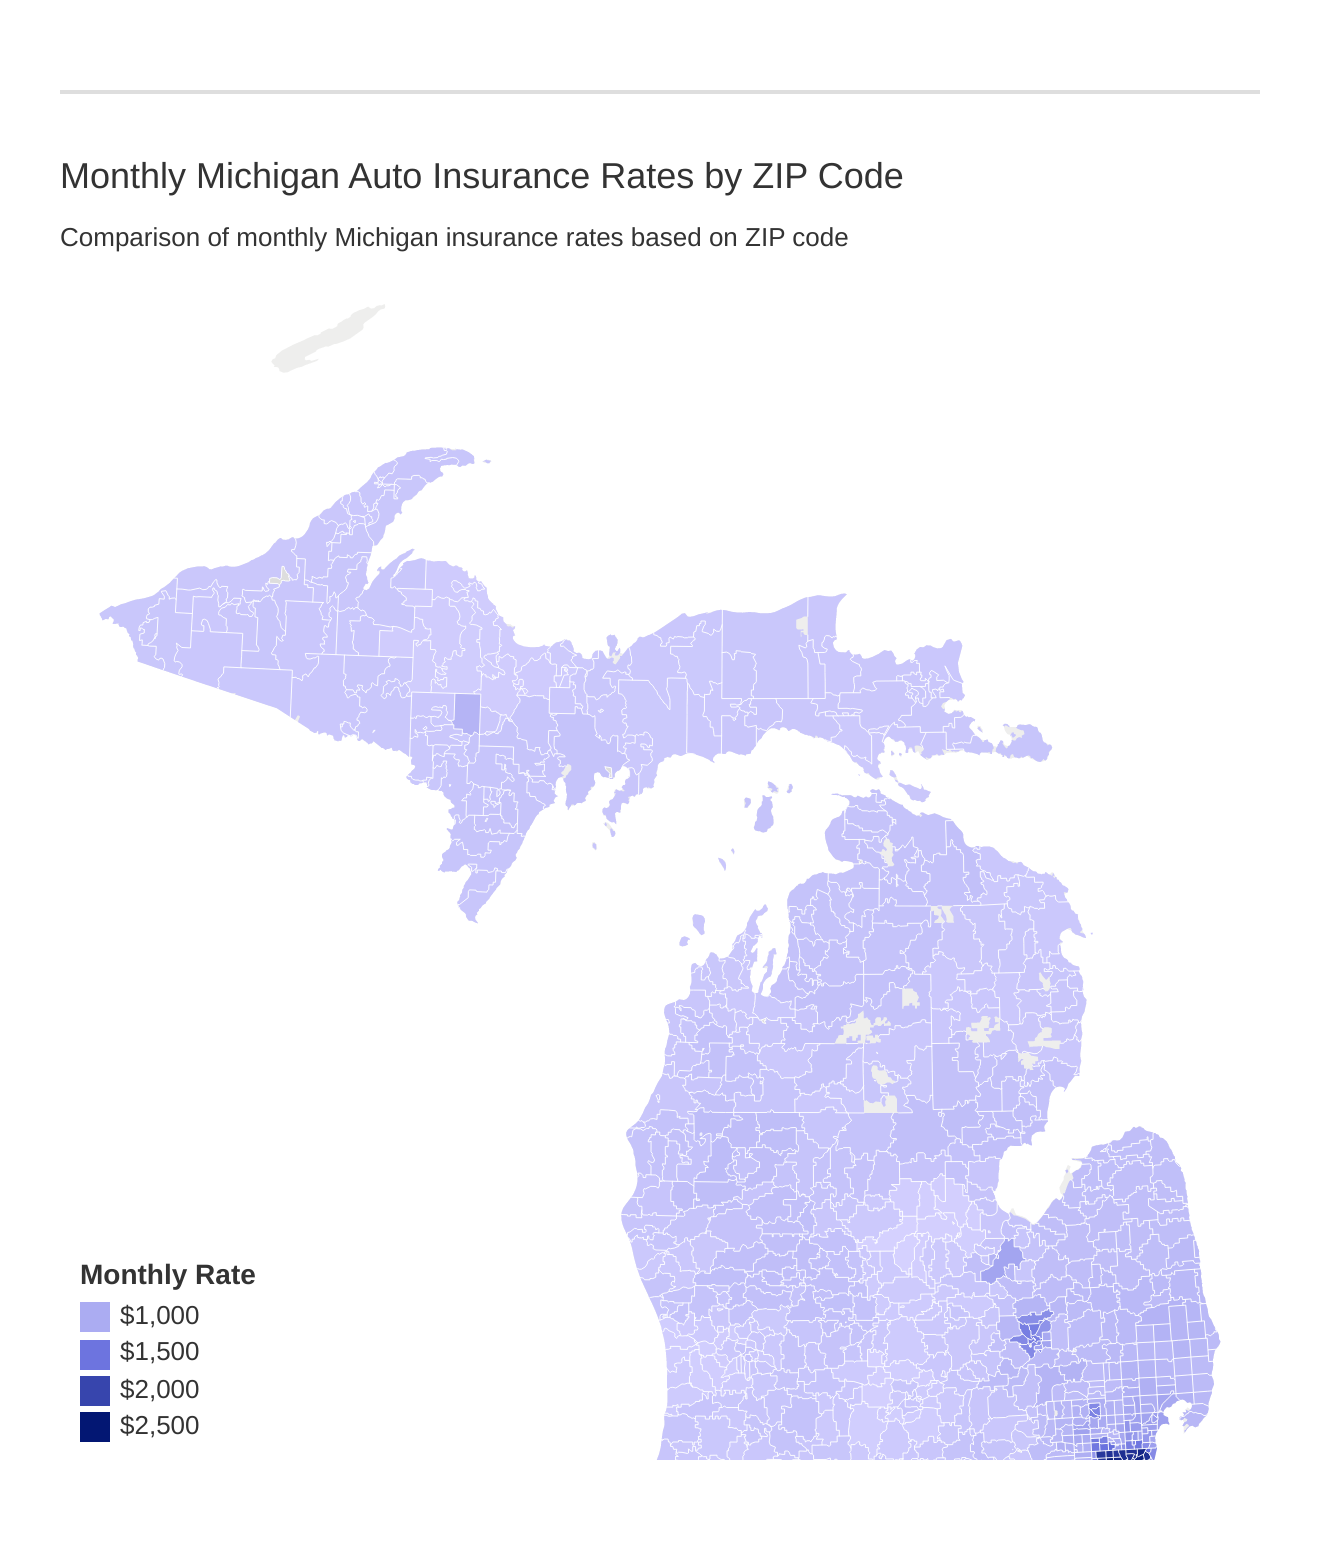 Monthly Michigan Auto Insurance Rates by ZIP Code